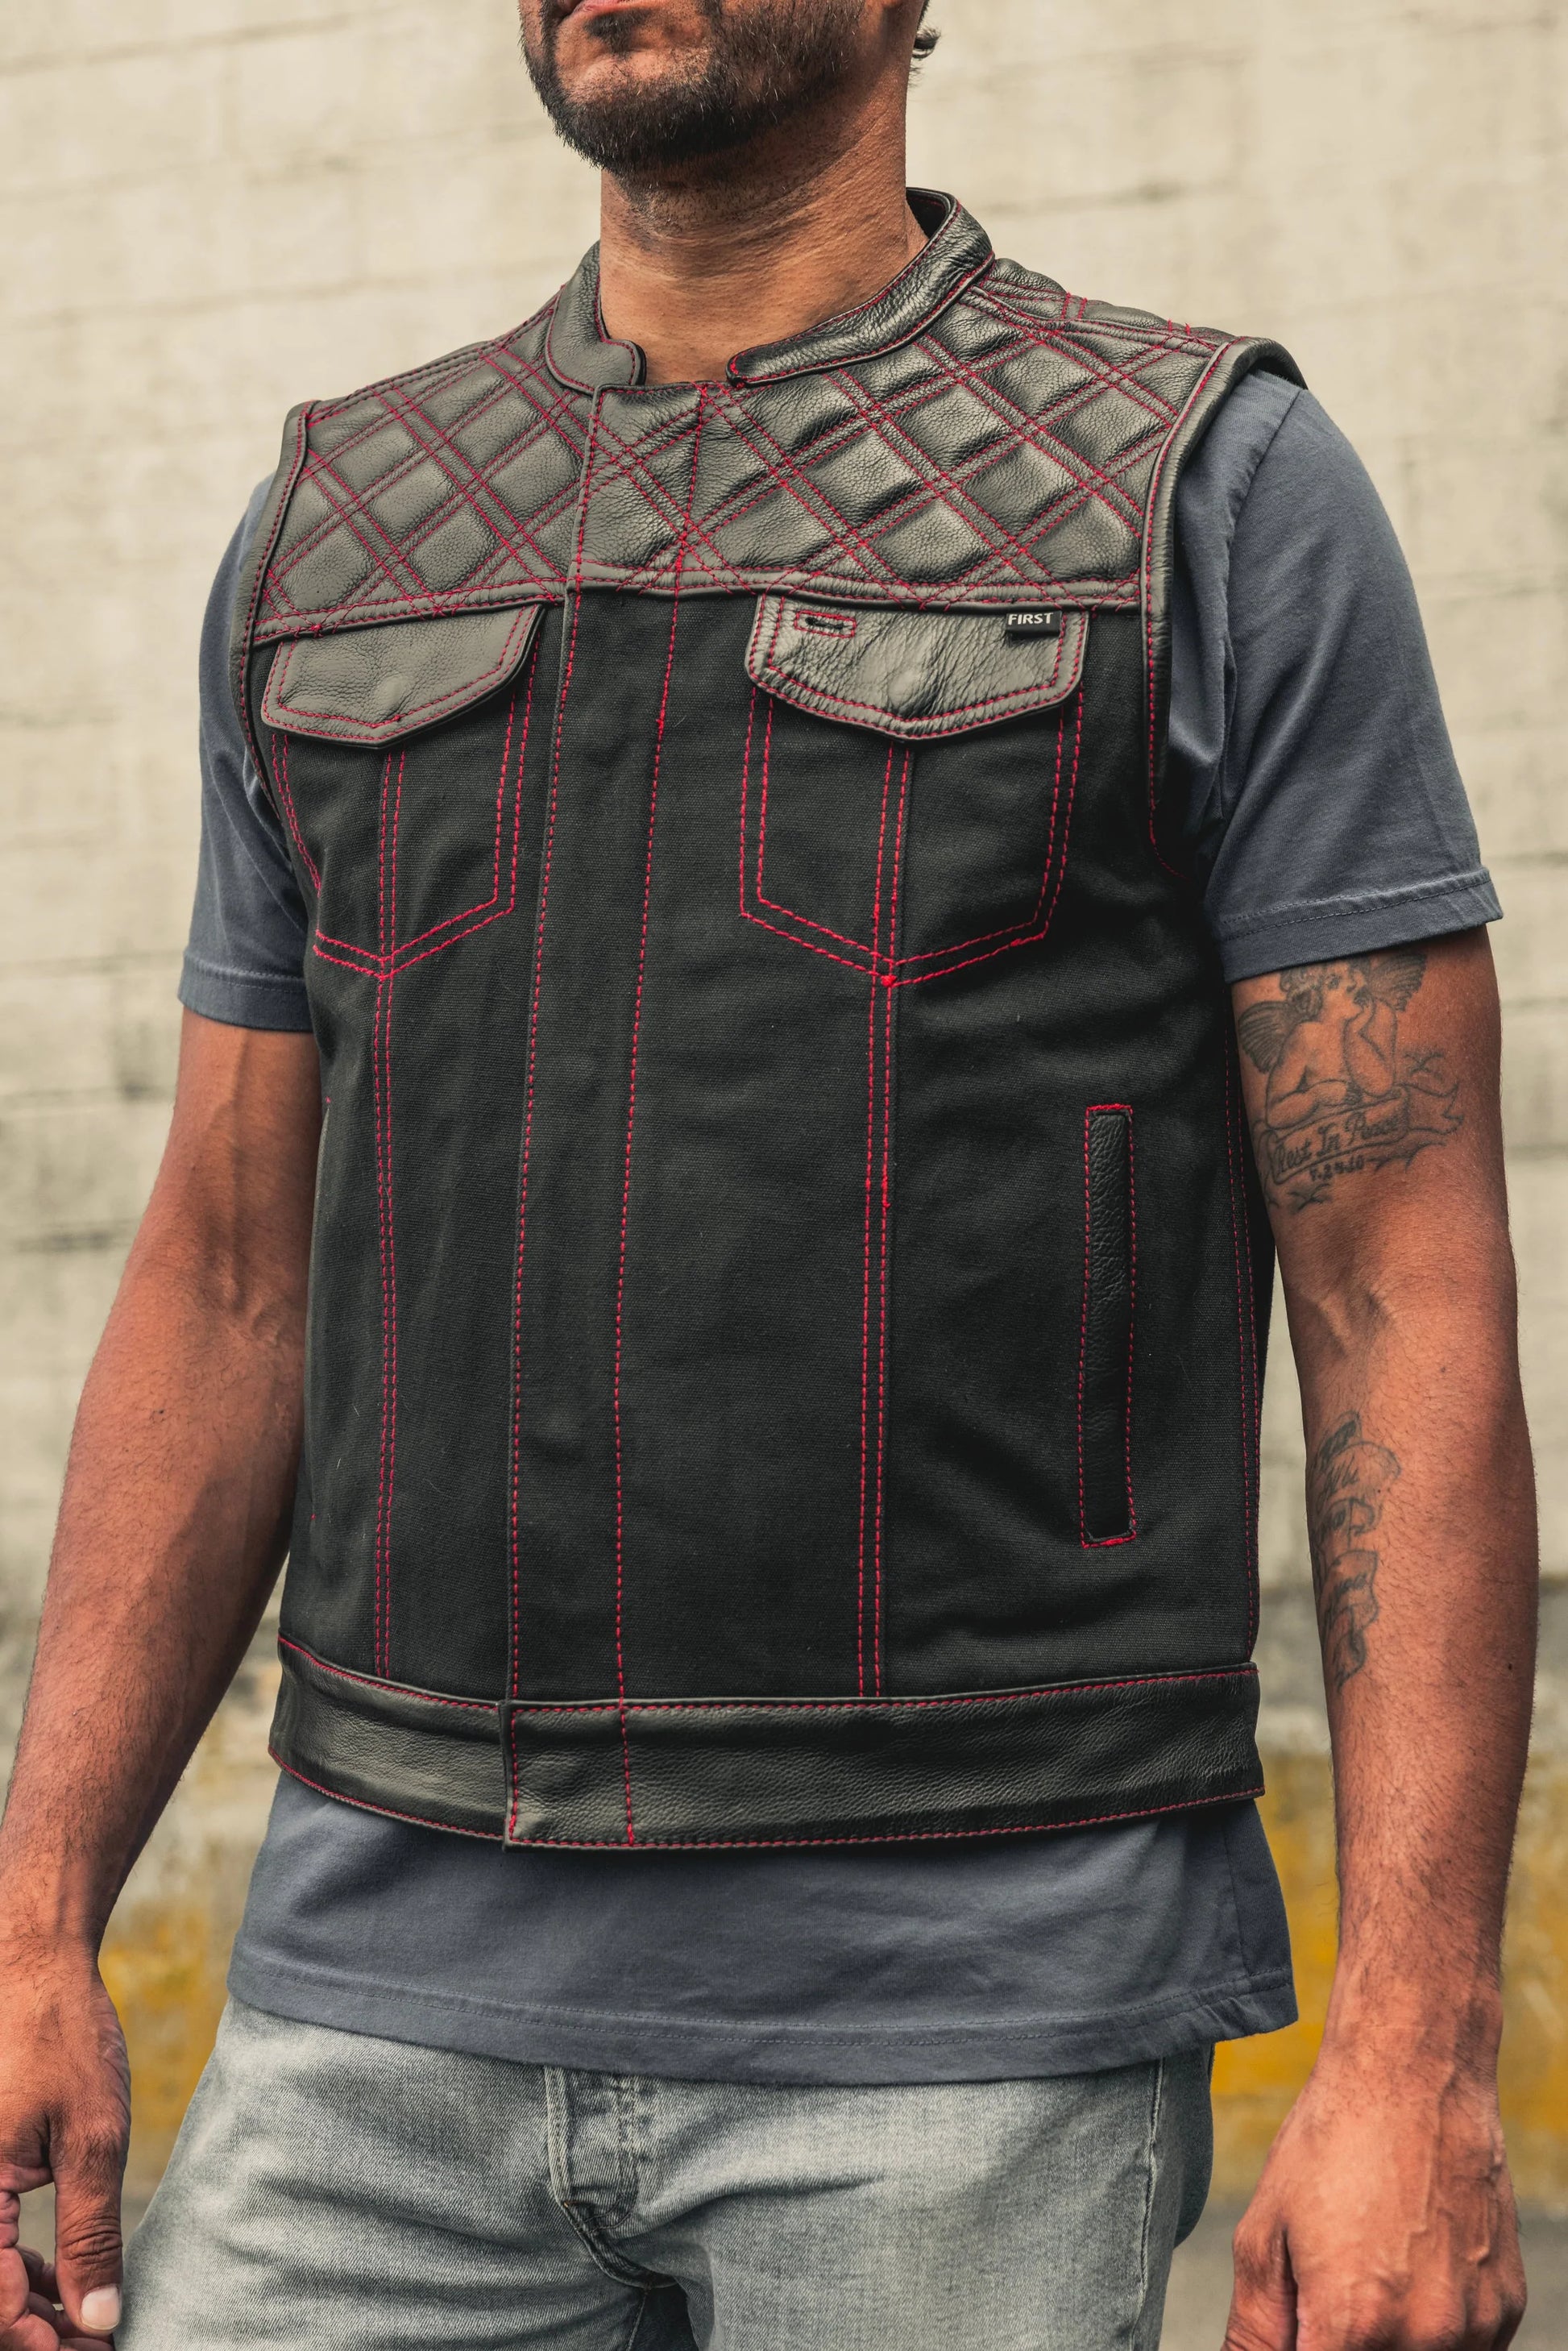 Hunt Club (Black/Red) - Motorcycle Leather Canvas Vest - Extreme Biker Leather